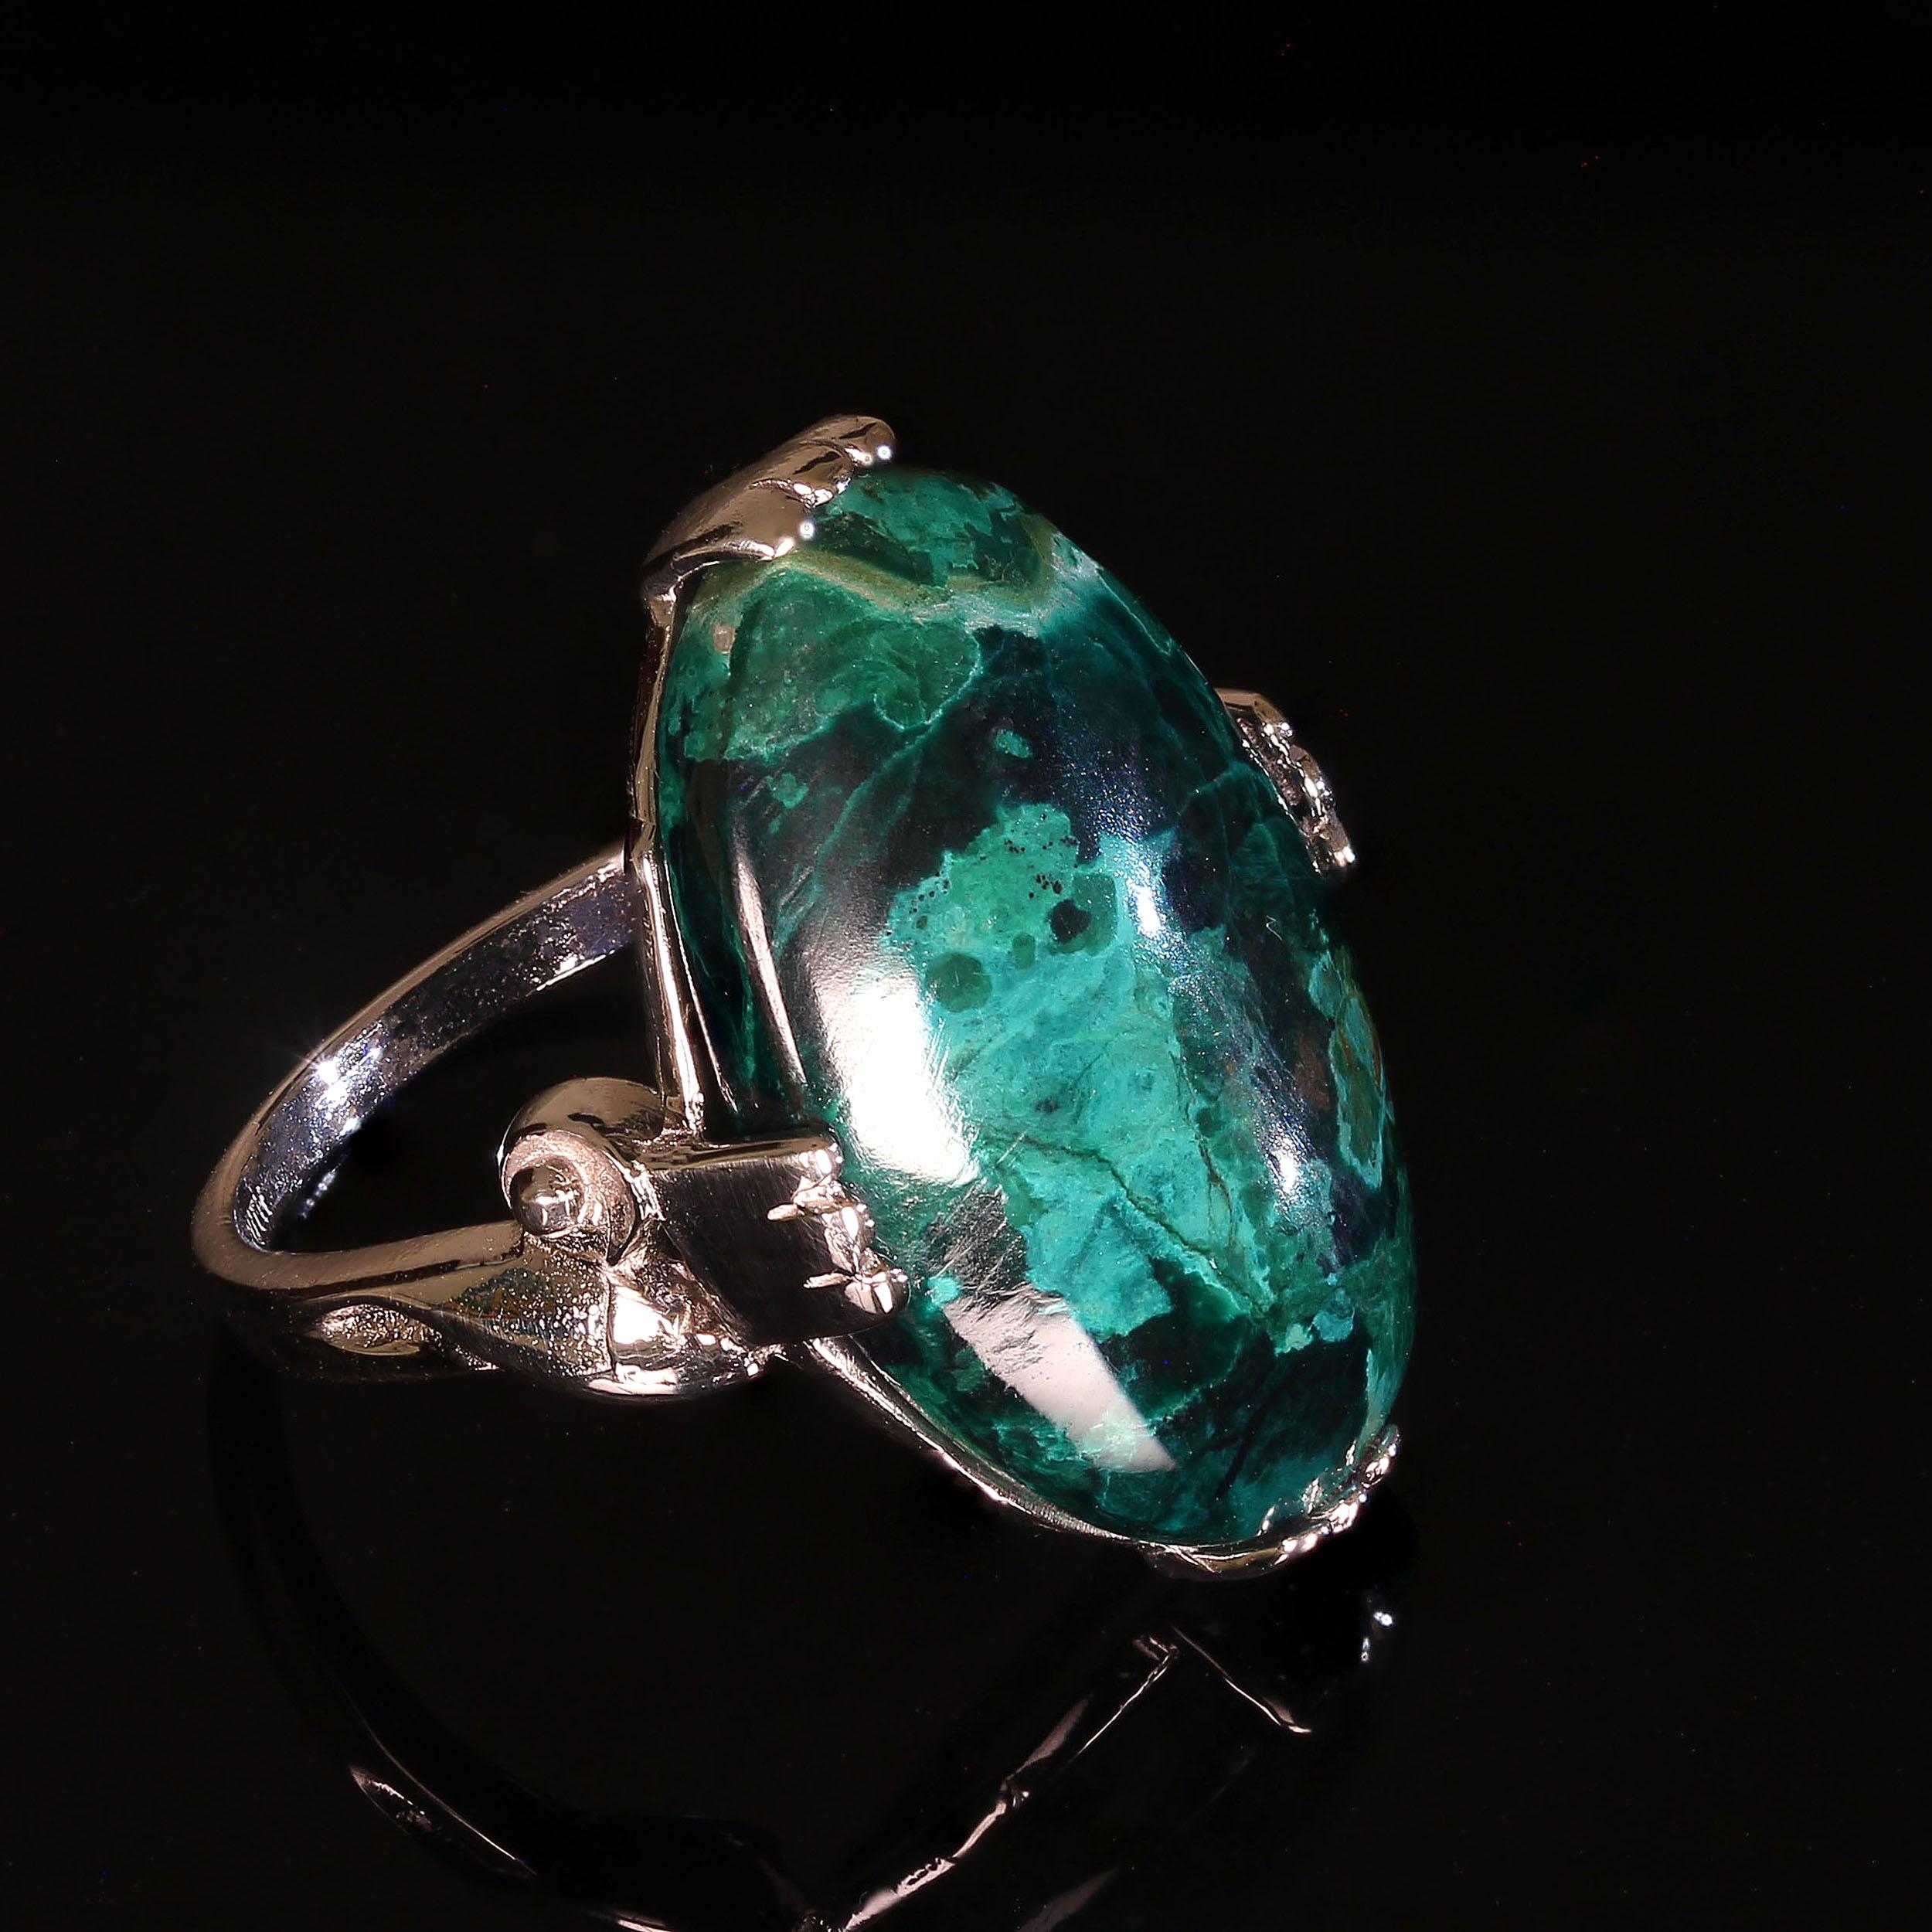 Elegant Chrysocolla Cabochon Ring of 14K White Gold. This 12.58 carat oval gemstone is as beautiful as they come, greens, verging on blue swirls with black. All of this in a 14K white gold setting made especially for this gemstone.  This is a